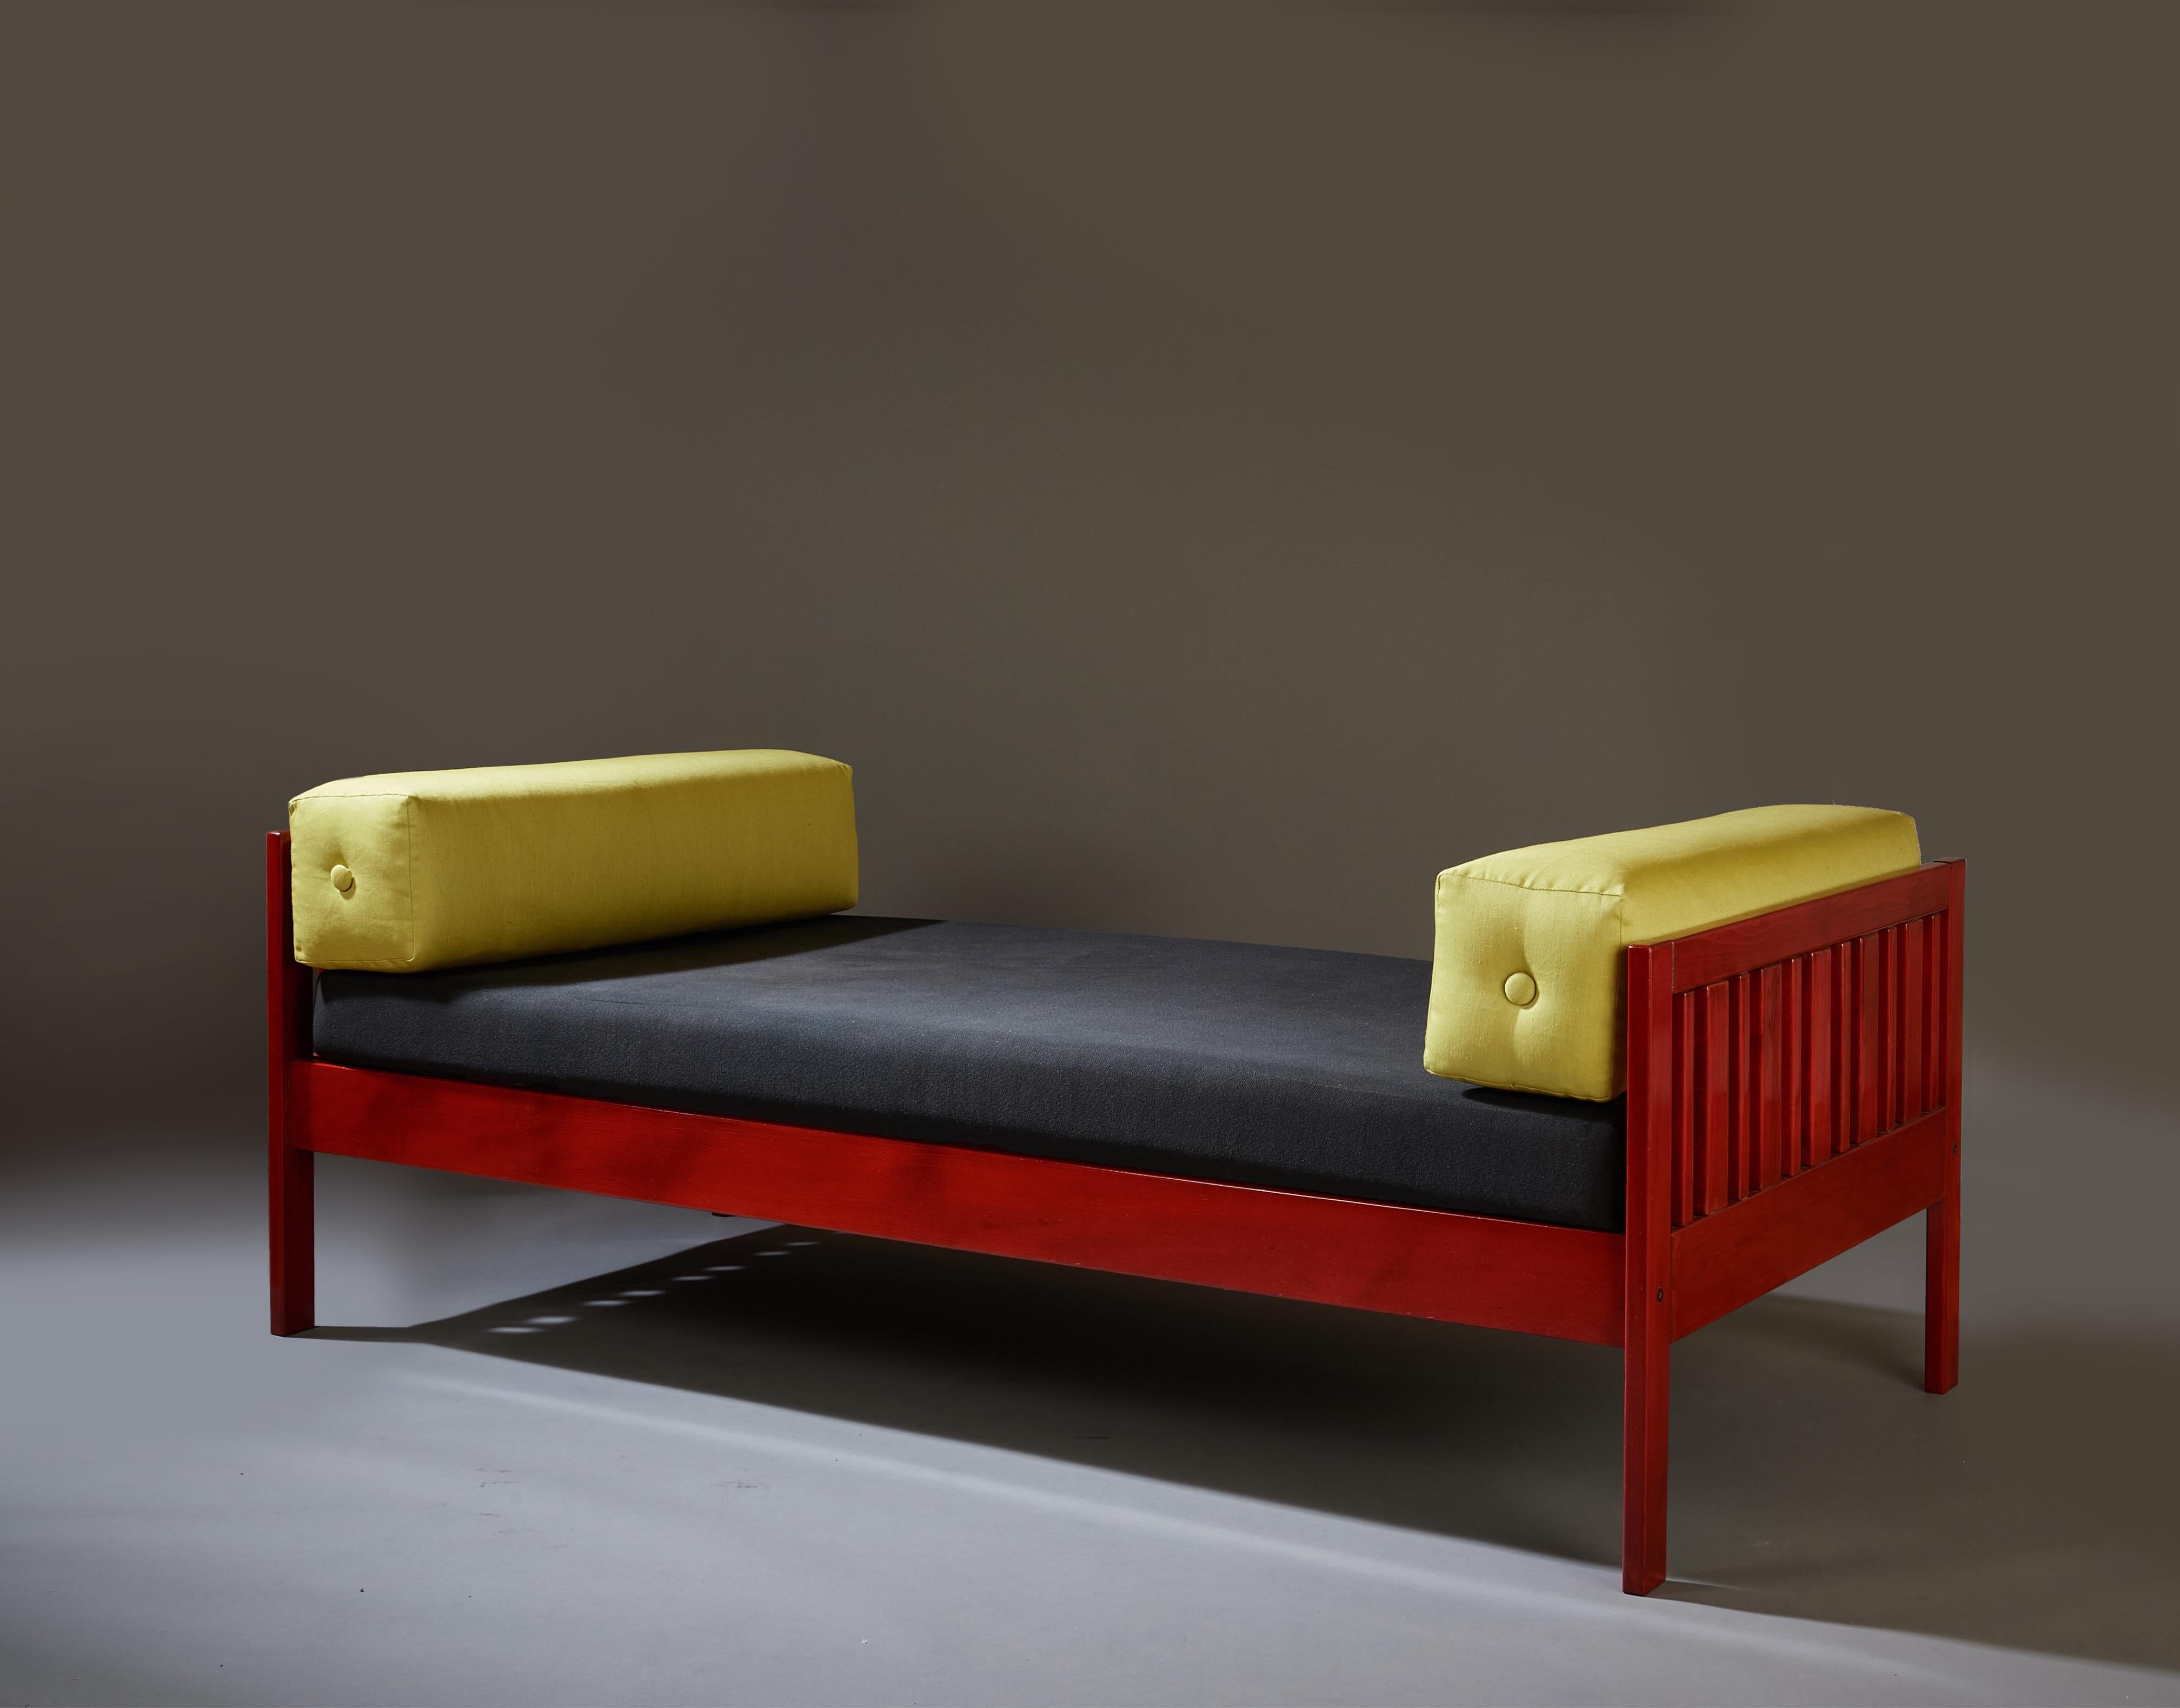 Ettore Sottsass (1917-2007) 

A lively and playful modernist daybed or sofa by Memphis Milano founder Ettore Sottsass, in red lacquered walnut with a black-upholstered cushion and two bolster pillows in chartreuse. 

An early work by the